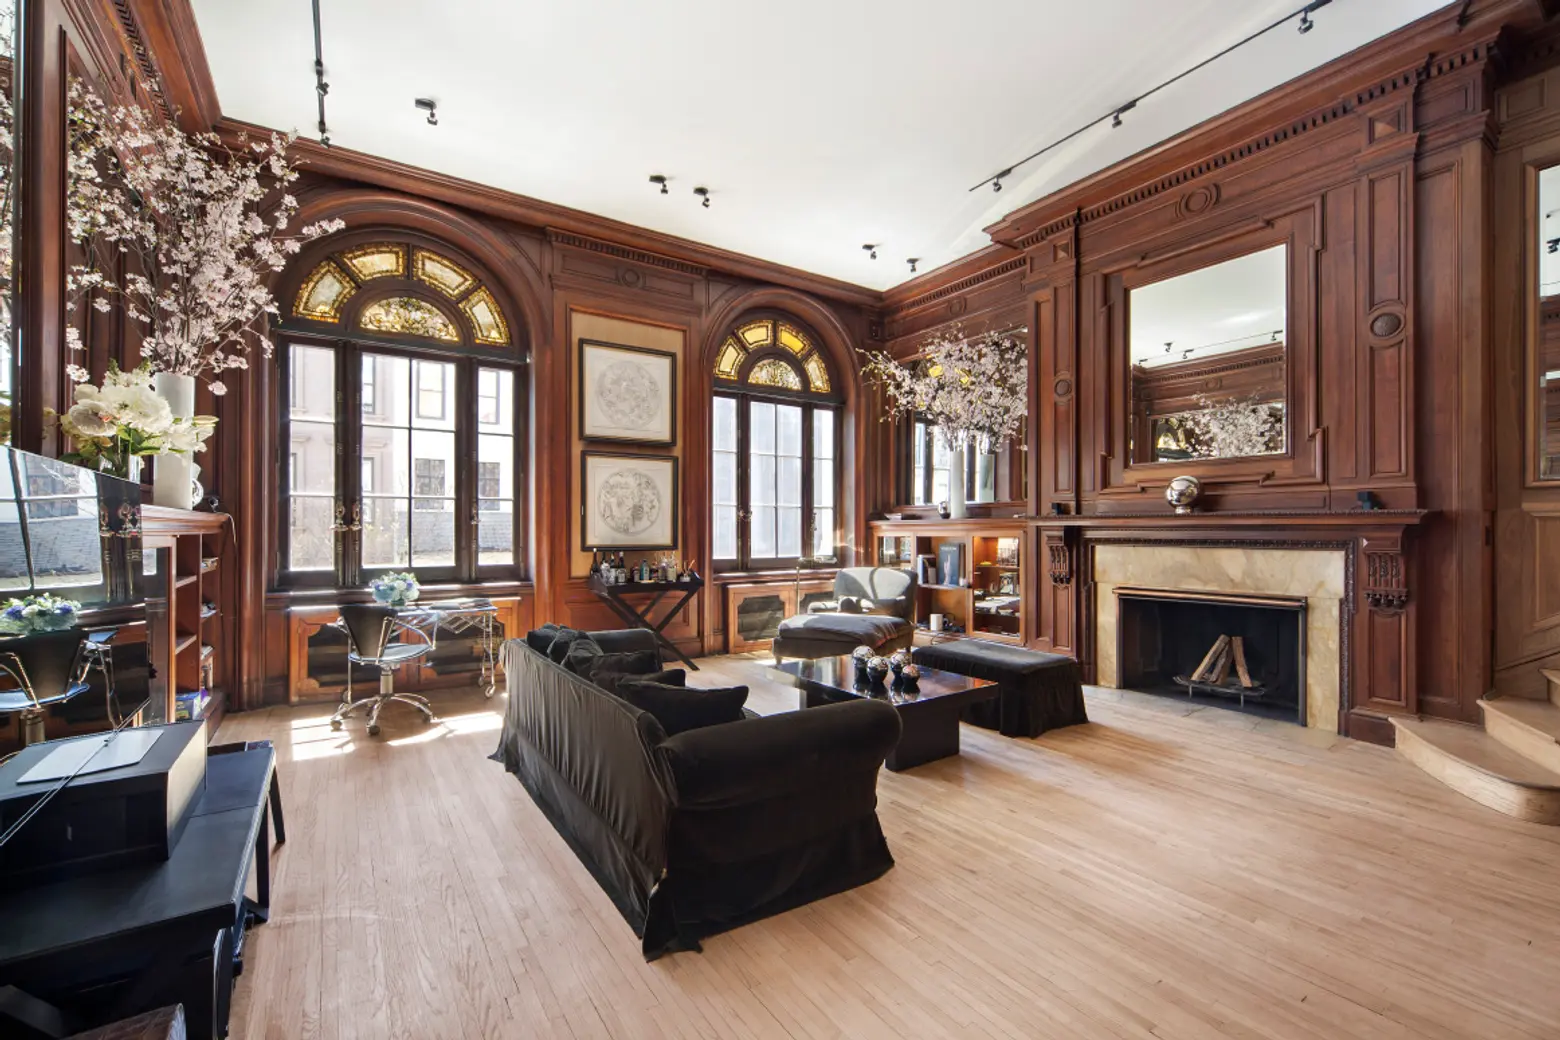 $4M landmarked Upper East Side mansion has Beaux Arts style and Tiffany Glass accents